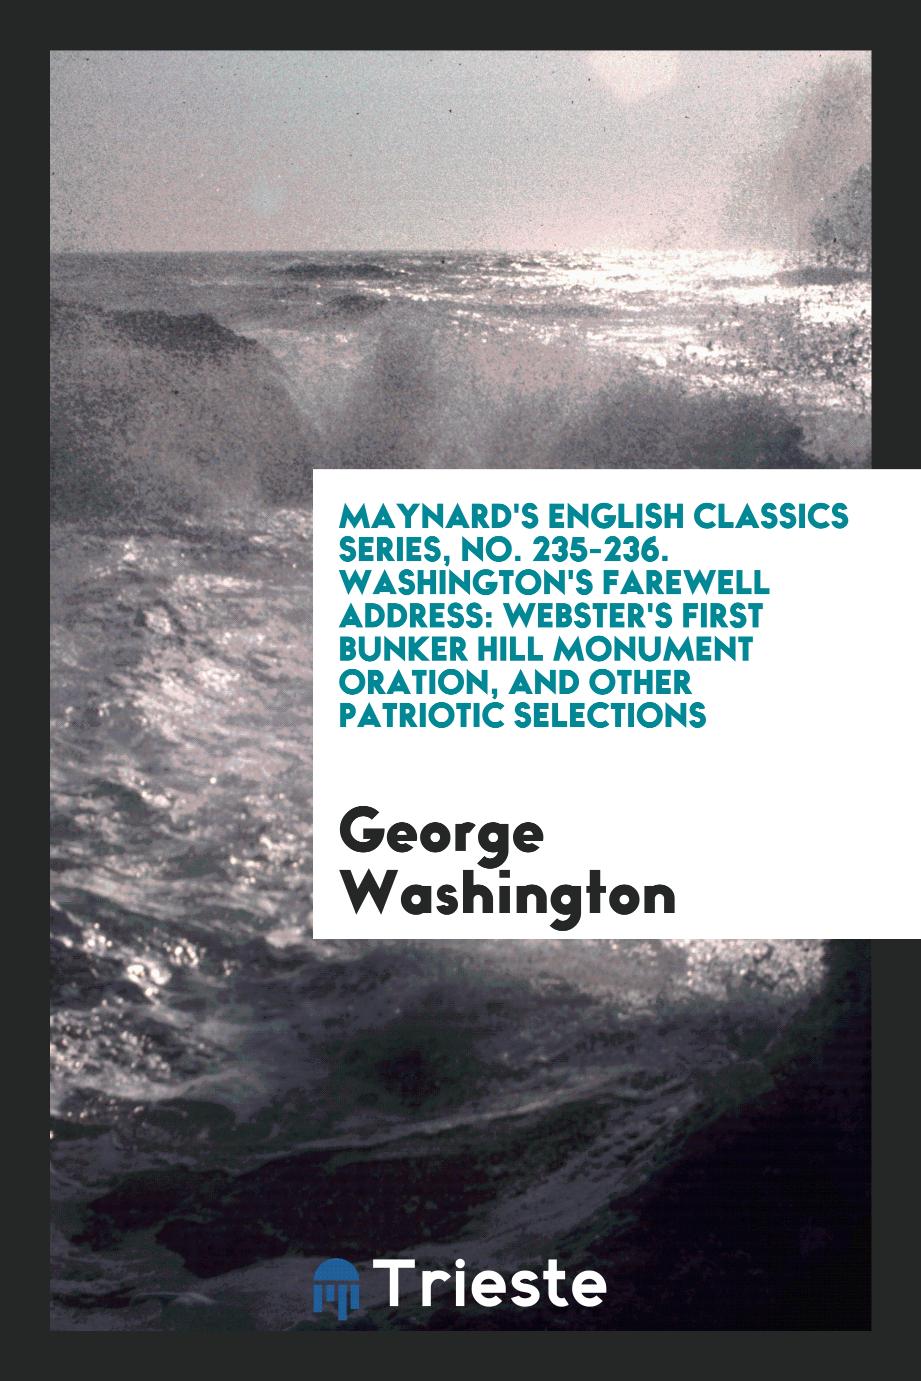 Maynard's English Classics Series, No. 235-236. Washington's Farewell Address: Webster's First Bunker Hill Monument Oration, and Other Patriotic Selections